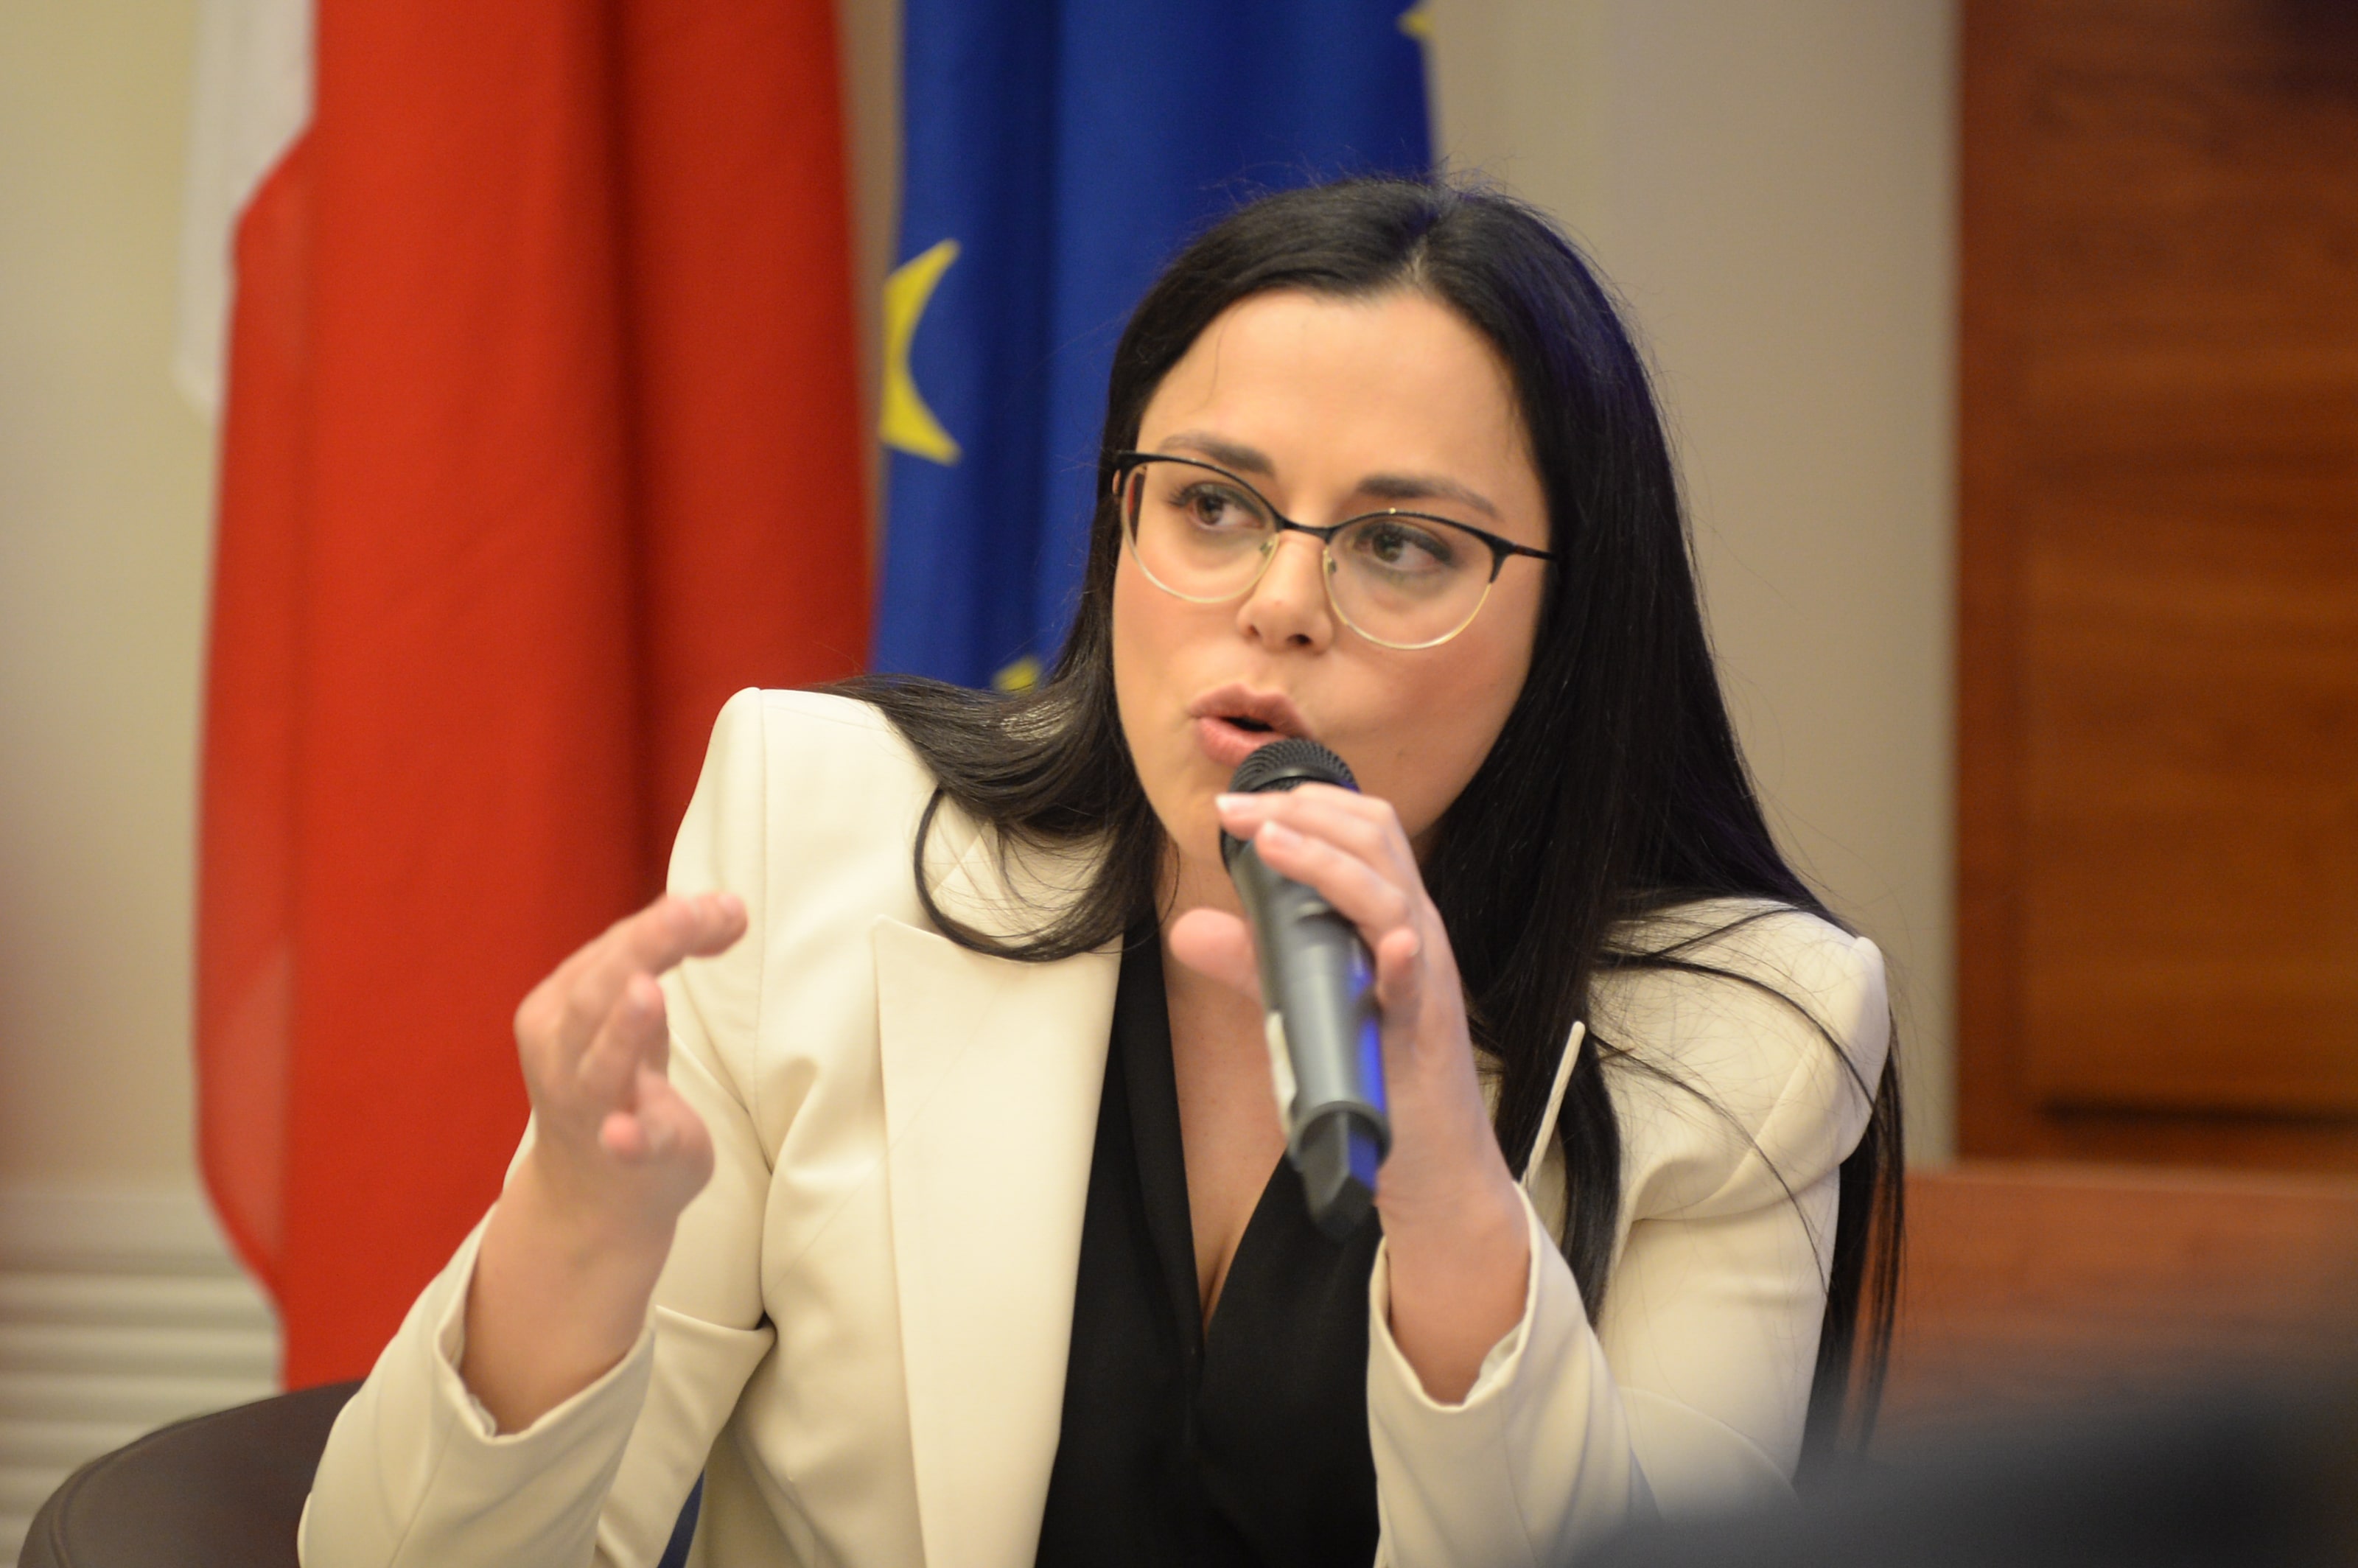 MEP Josianne Cutajar at the "Strengthened Connectivity and Justice for Our Islands" event